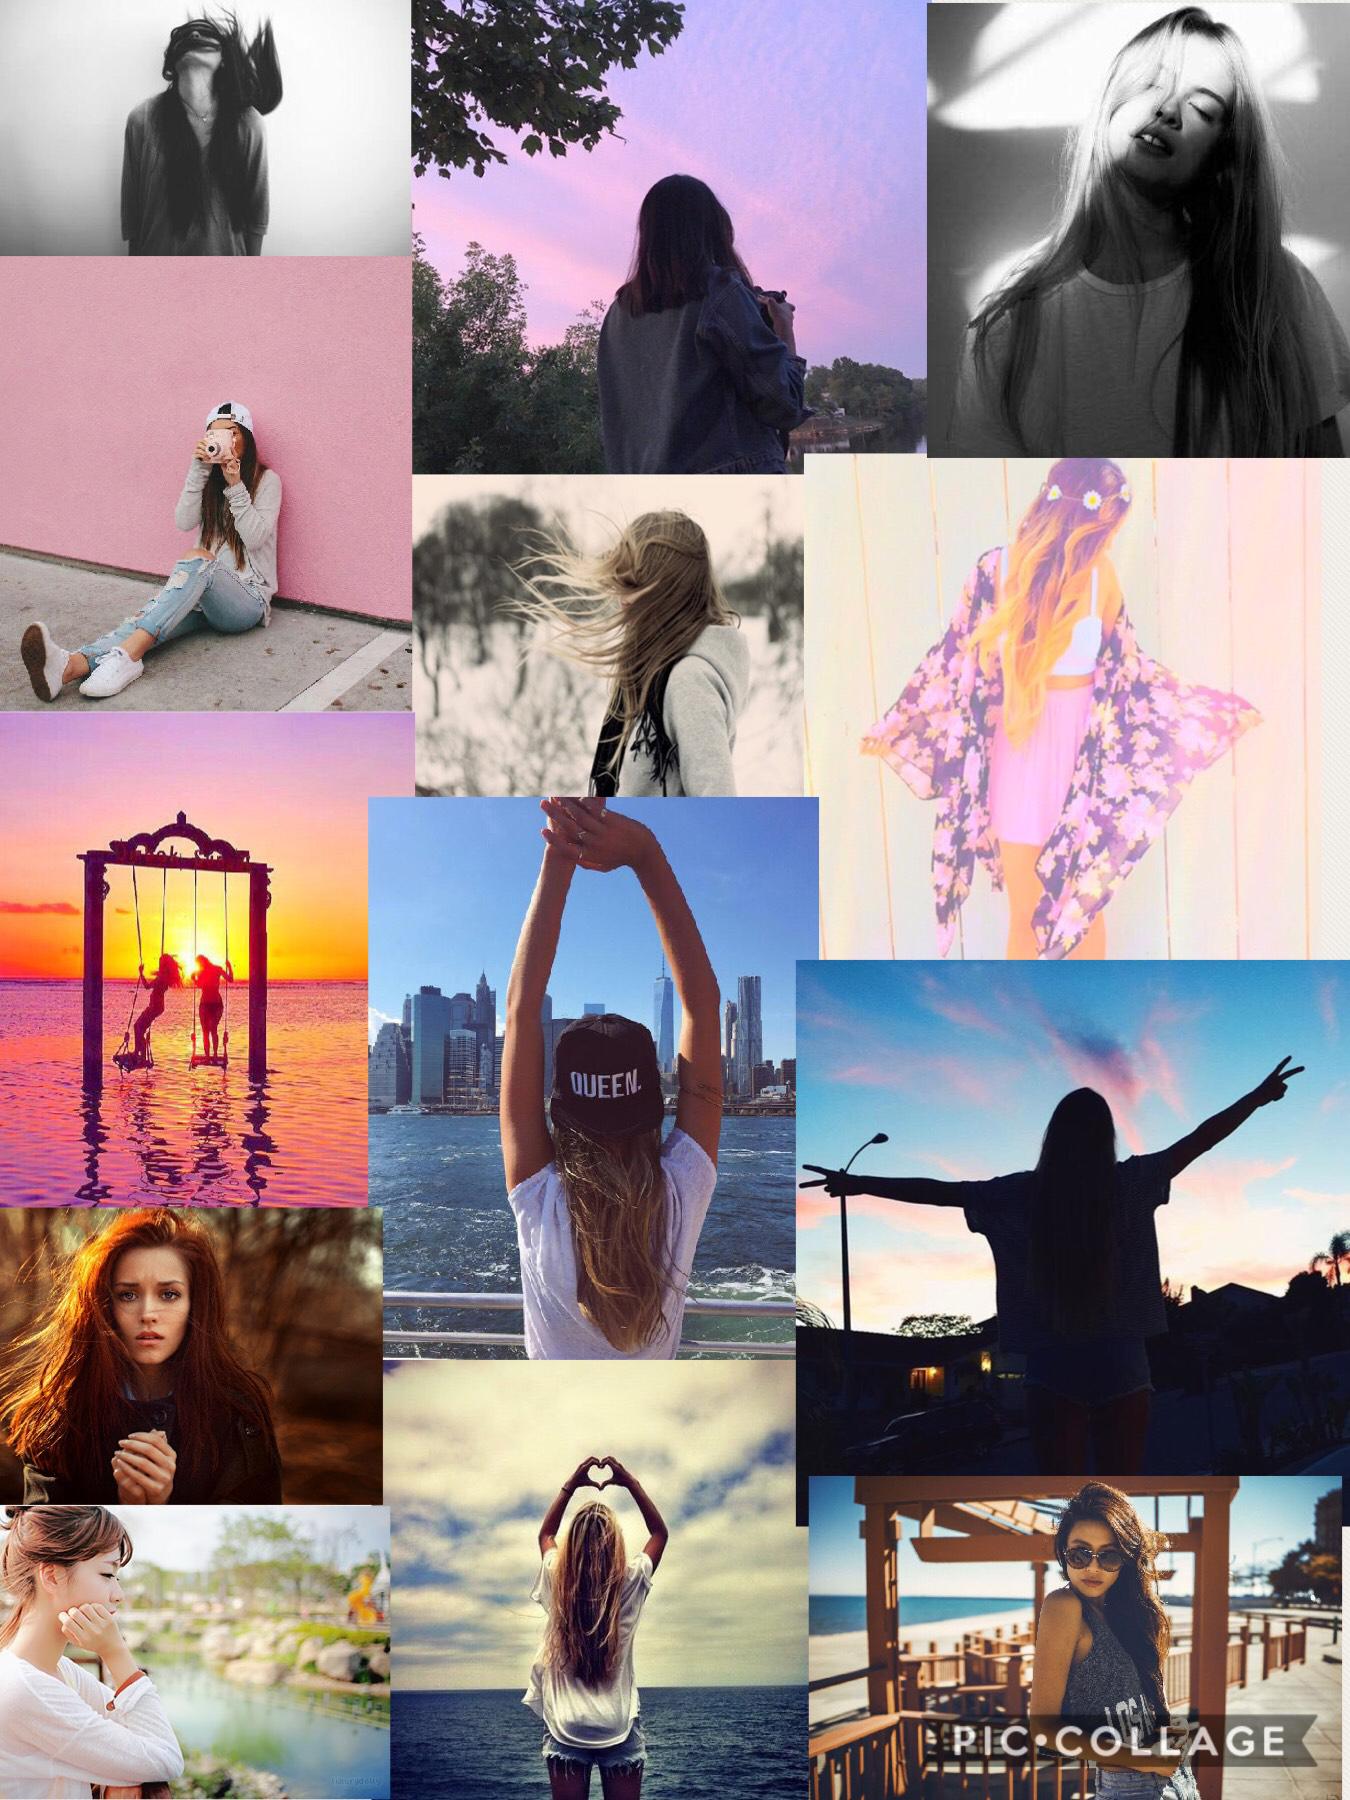 😊Tmblr Girl Backgrounds! I know These Are Pretty Popular!😊